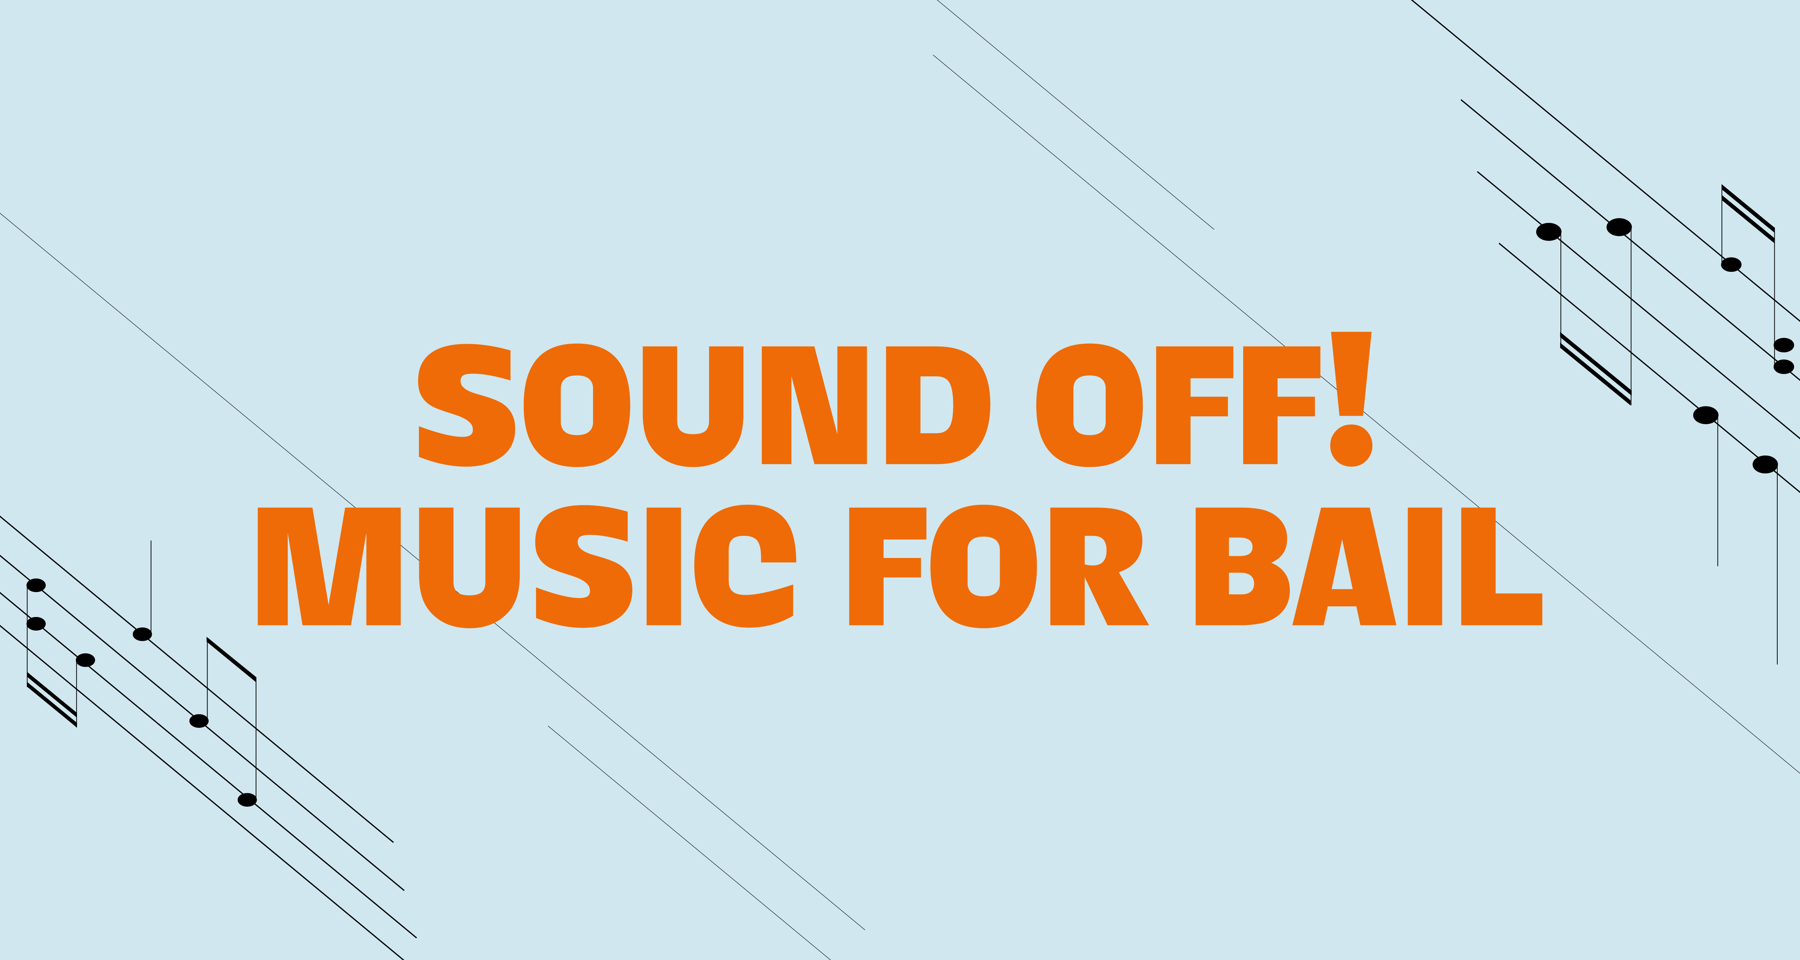 Sound Off x Bass Players for Black Composers: New Works for the New Year